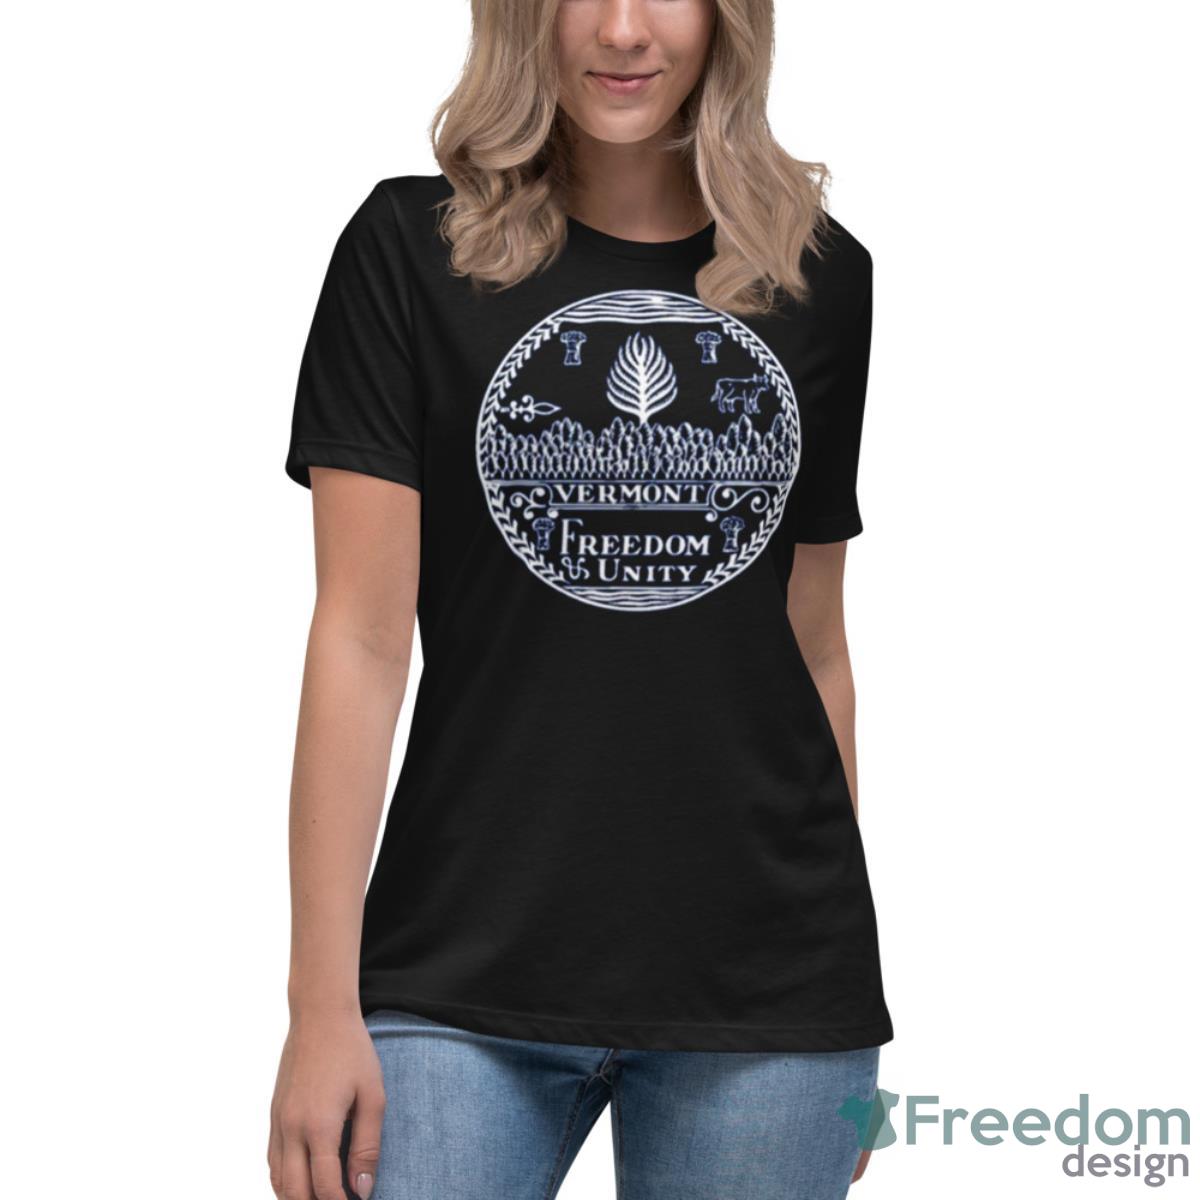 The Vermont Seal White Us Military shirt